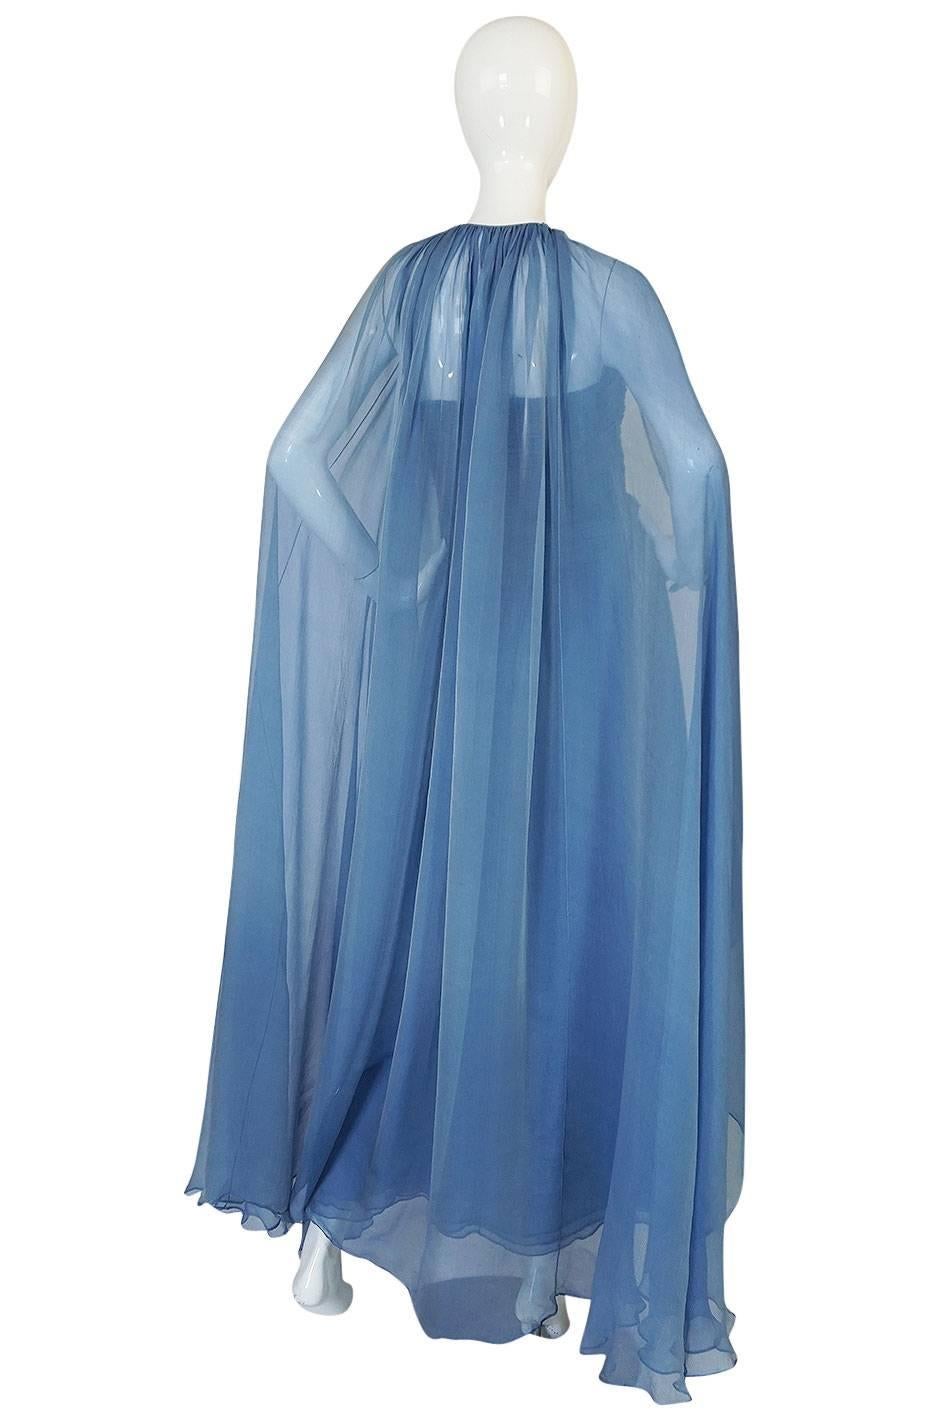 

This is a beautiful and romantic bias cut silk chiffon dress with a matching full length cape by the great American couturier Oscar de la Renta. Both pieces are constructed from layers of a lightweight, slightly textured, silk chiffon in the